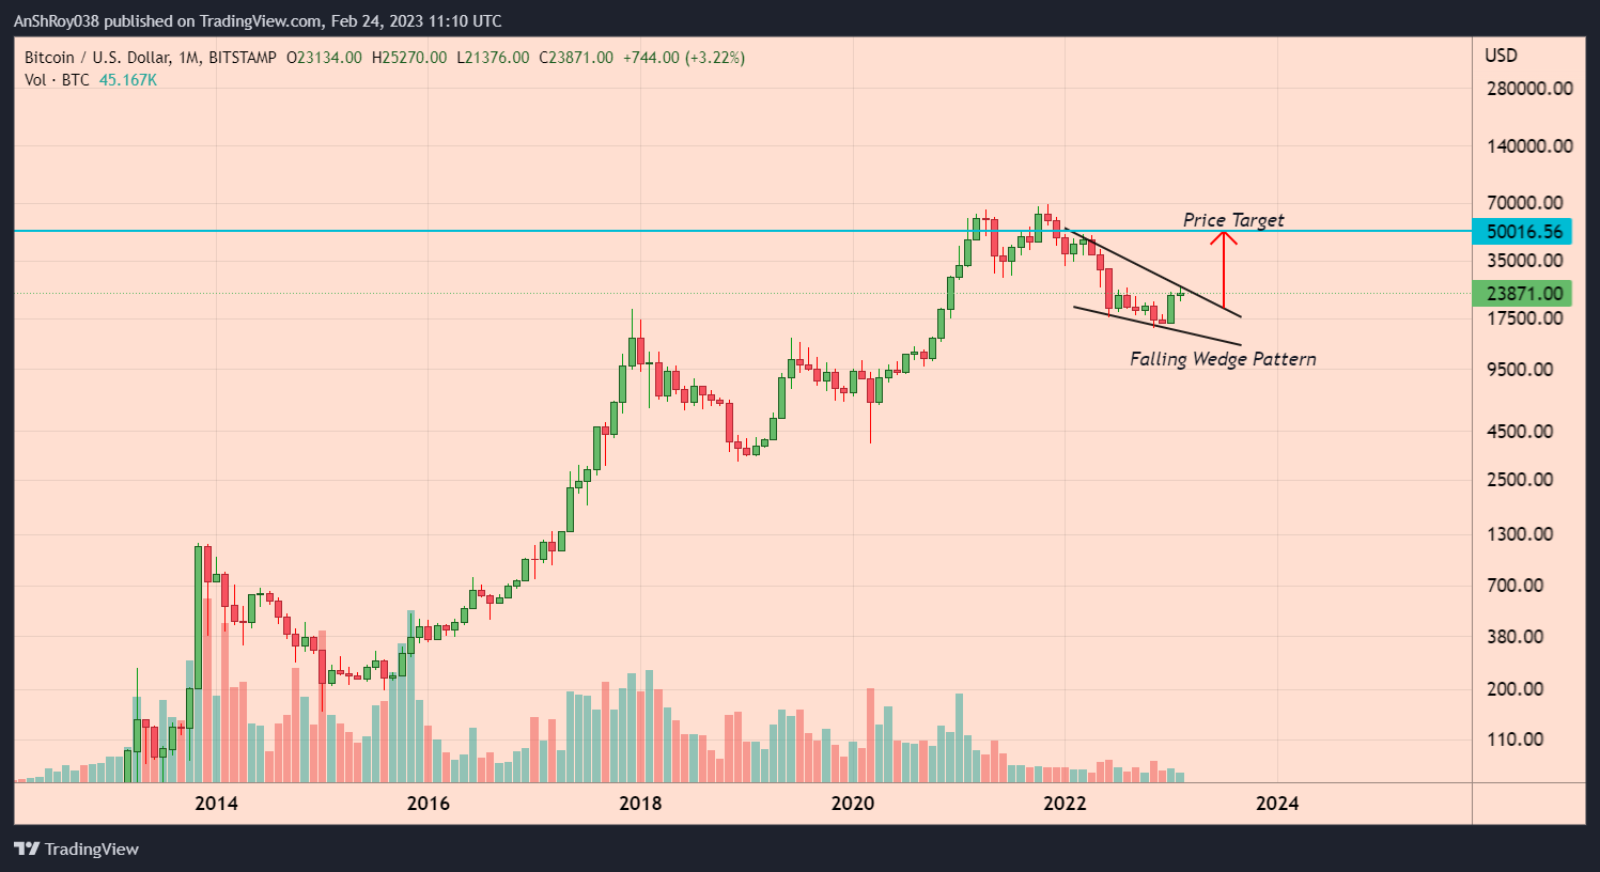 BTC price has formed a falling wedge pattern with a 110% price target